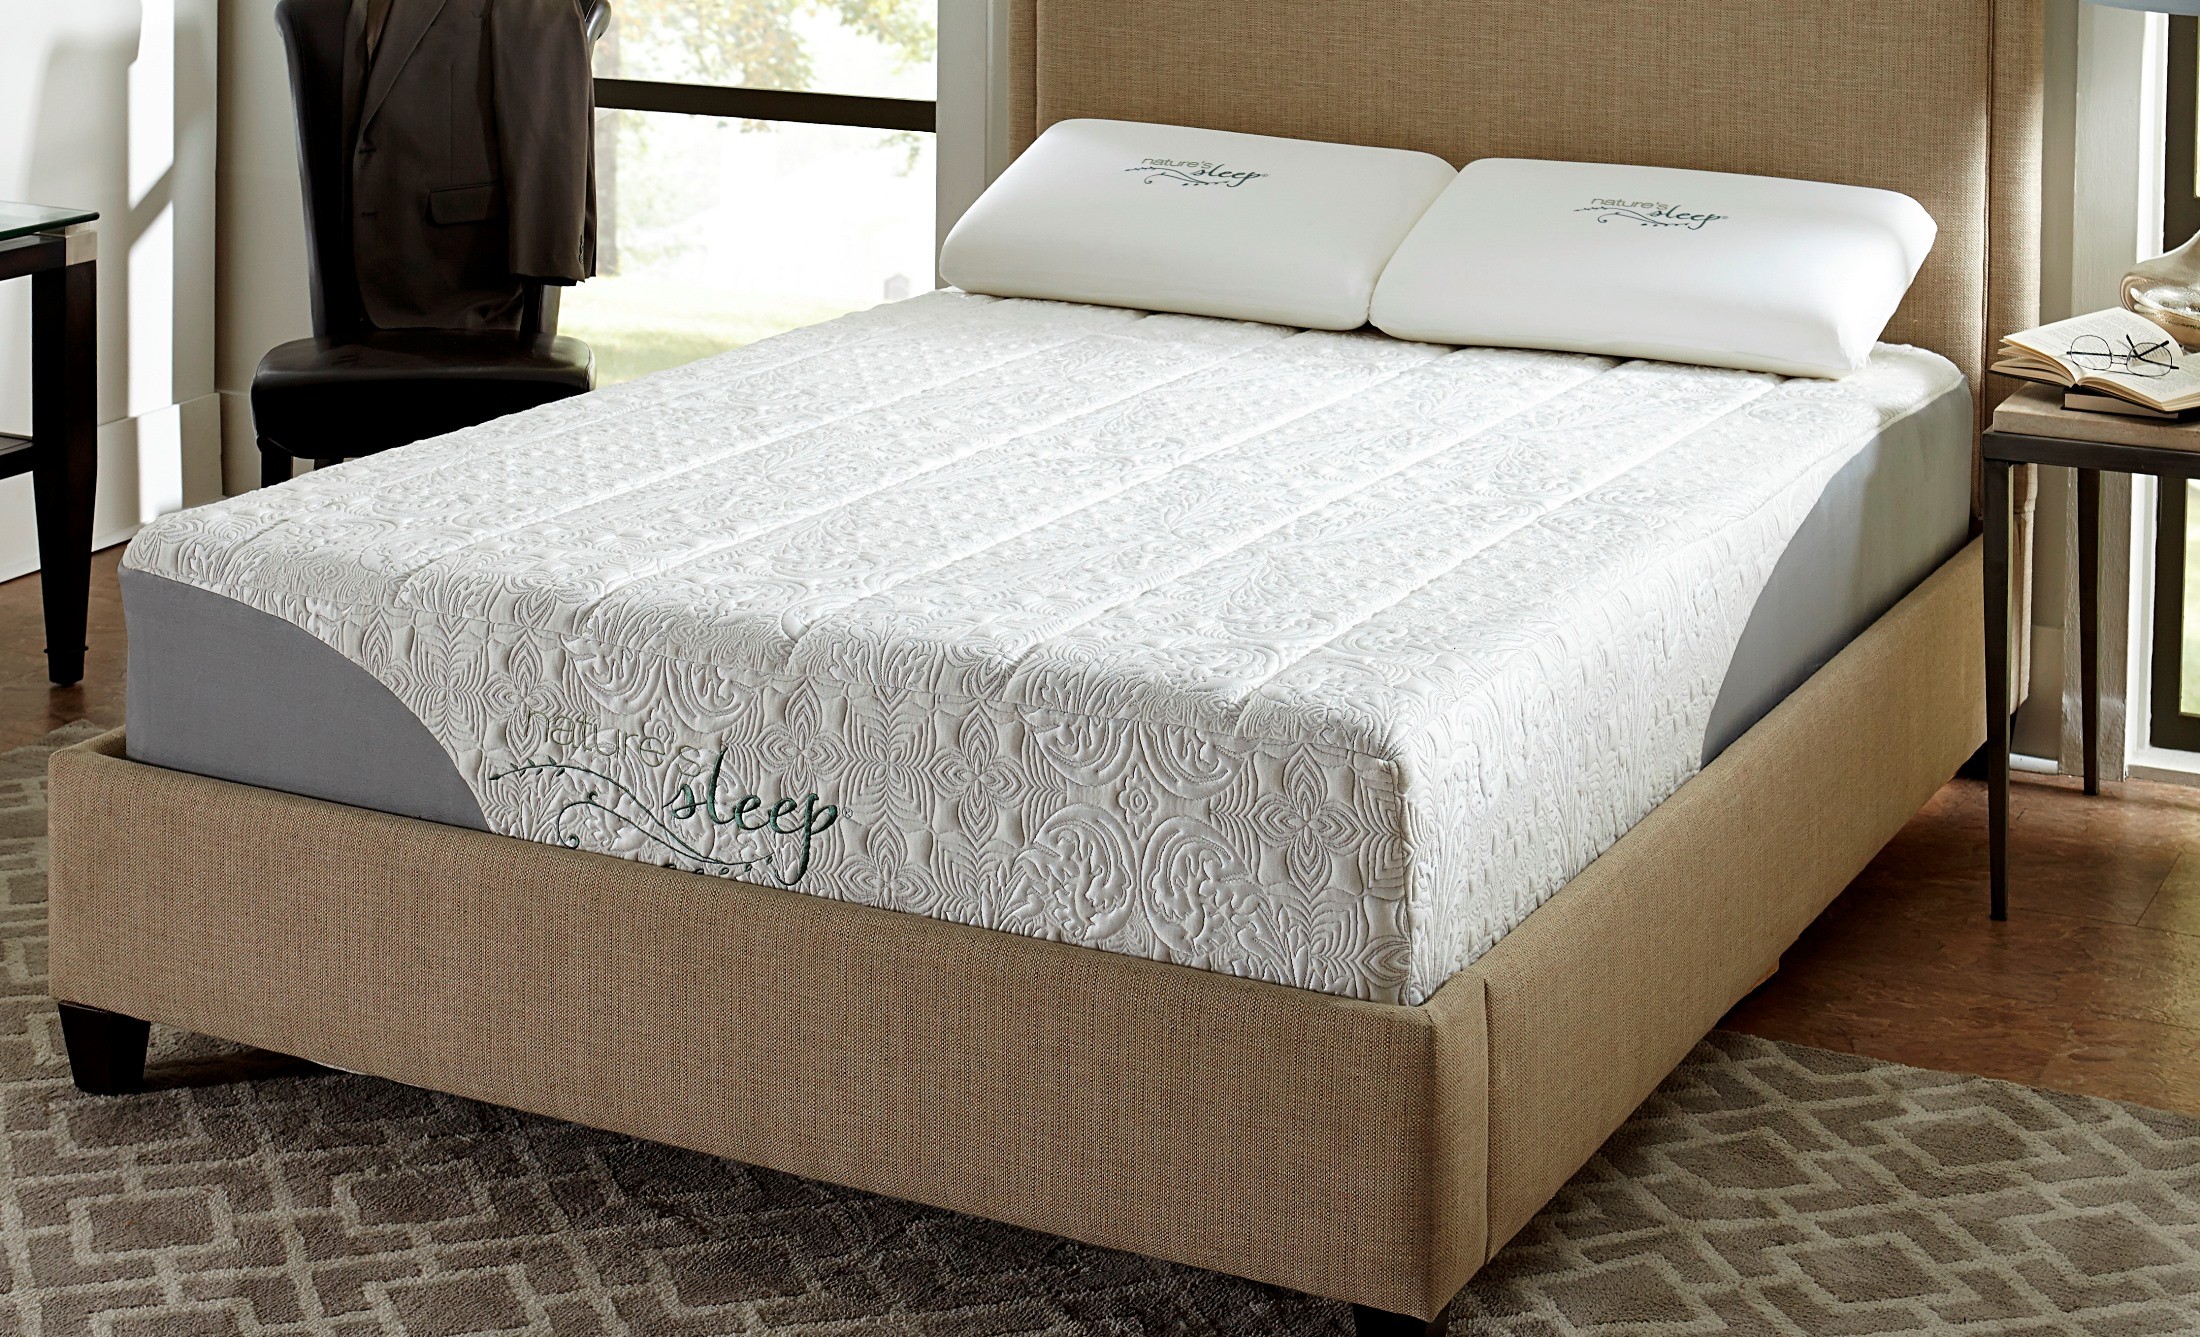 memory foam mattress for queen bed 14 inches